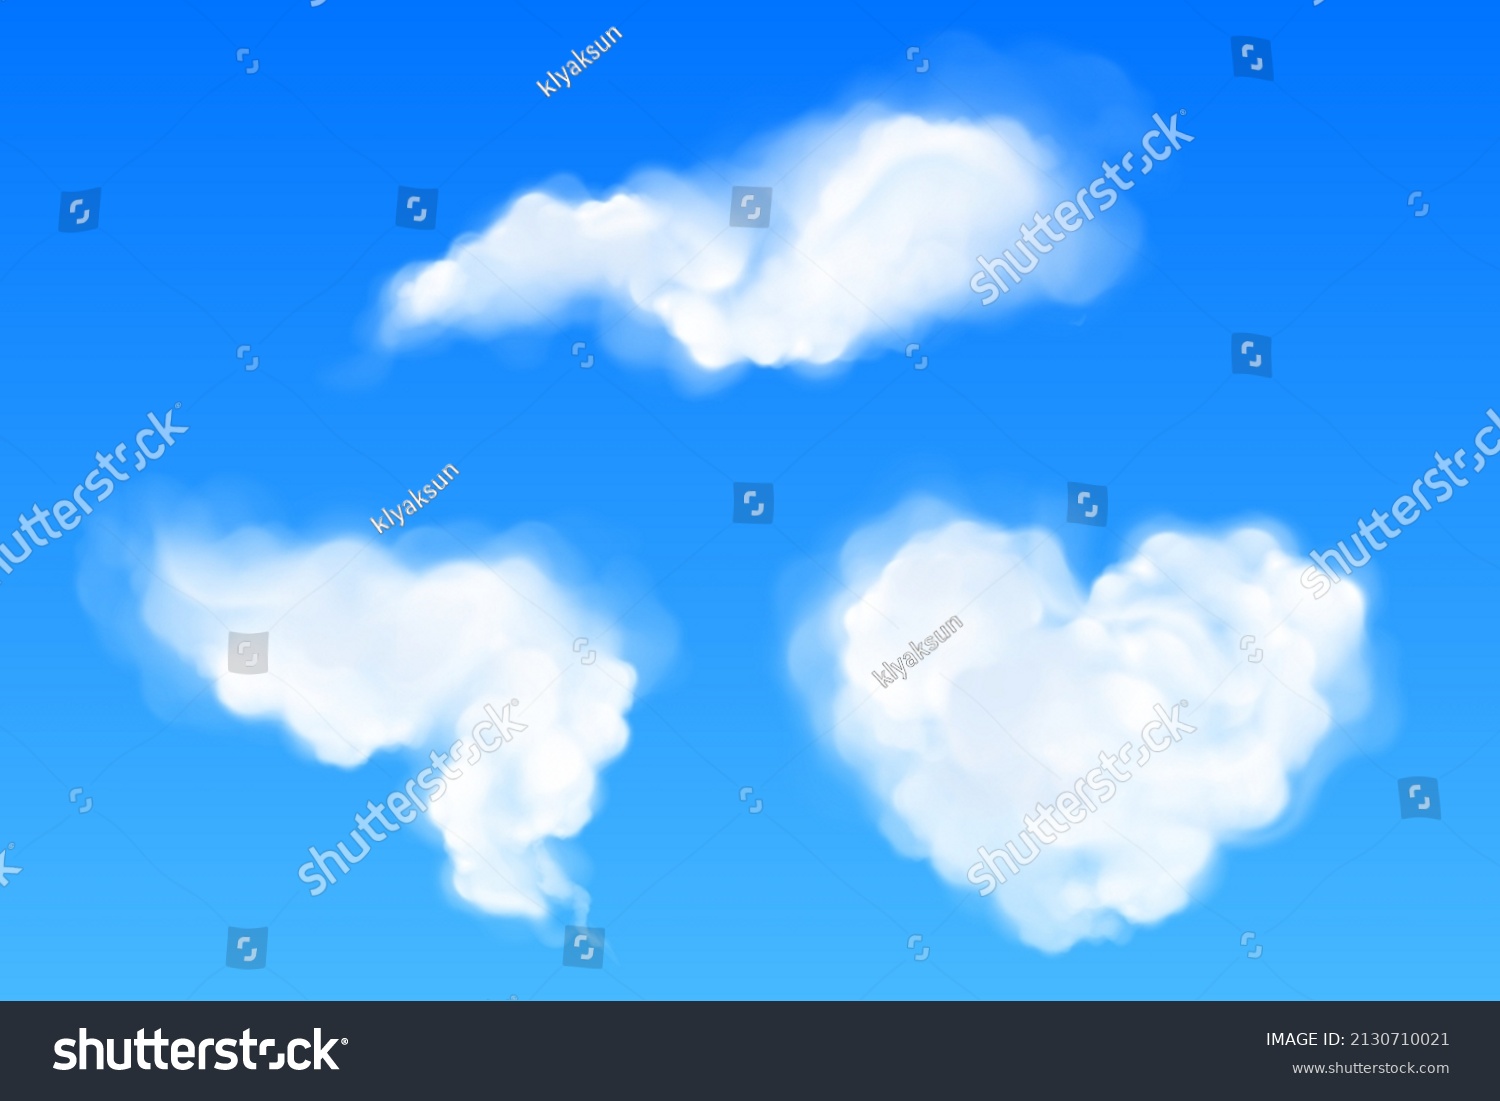 Realistic clouds of heart and abstract shapes, white fluffy spindrift or cumulus eddies flying in blue sky. Weather forecast and nature design elements, 3d Vector illustration, isolated icons set #2130710021